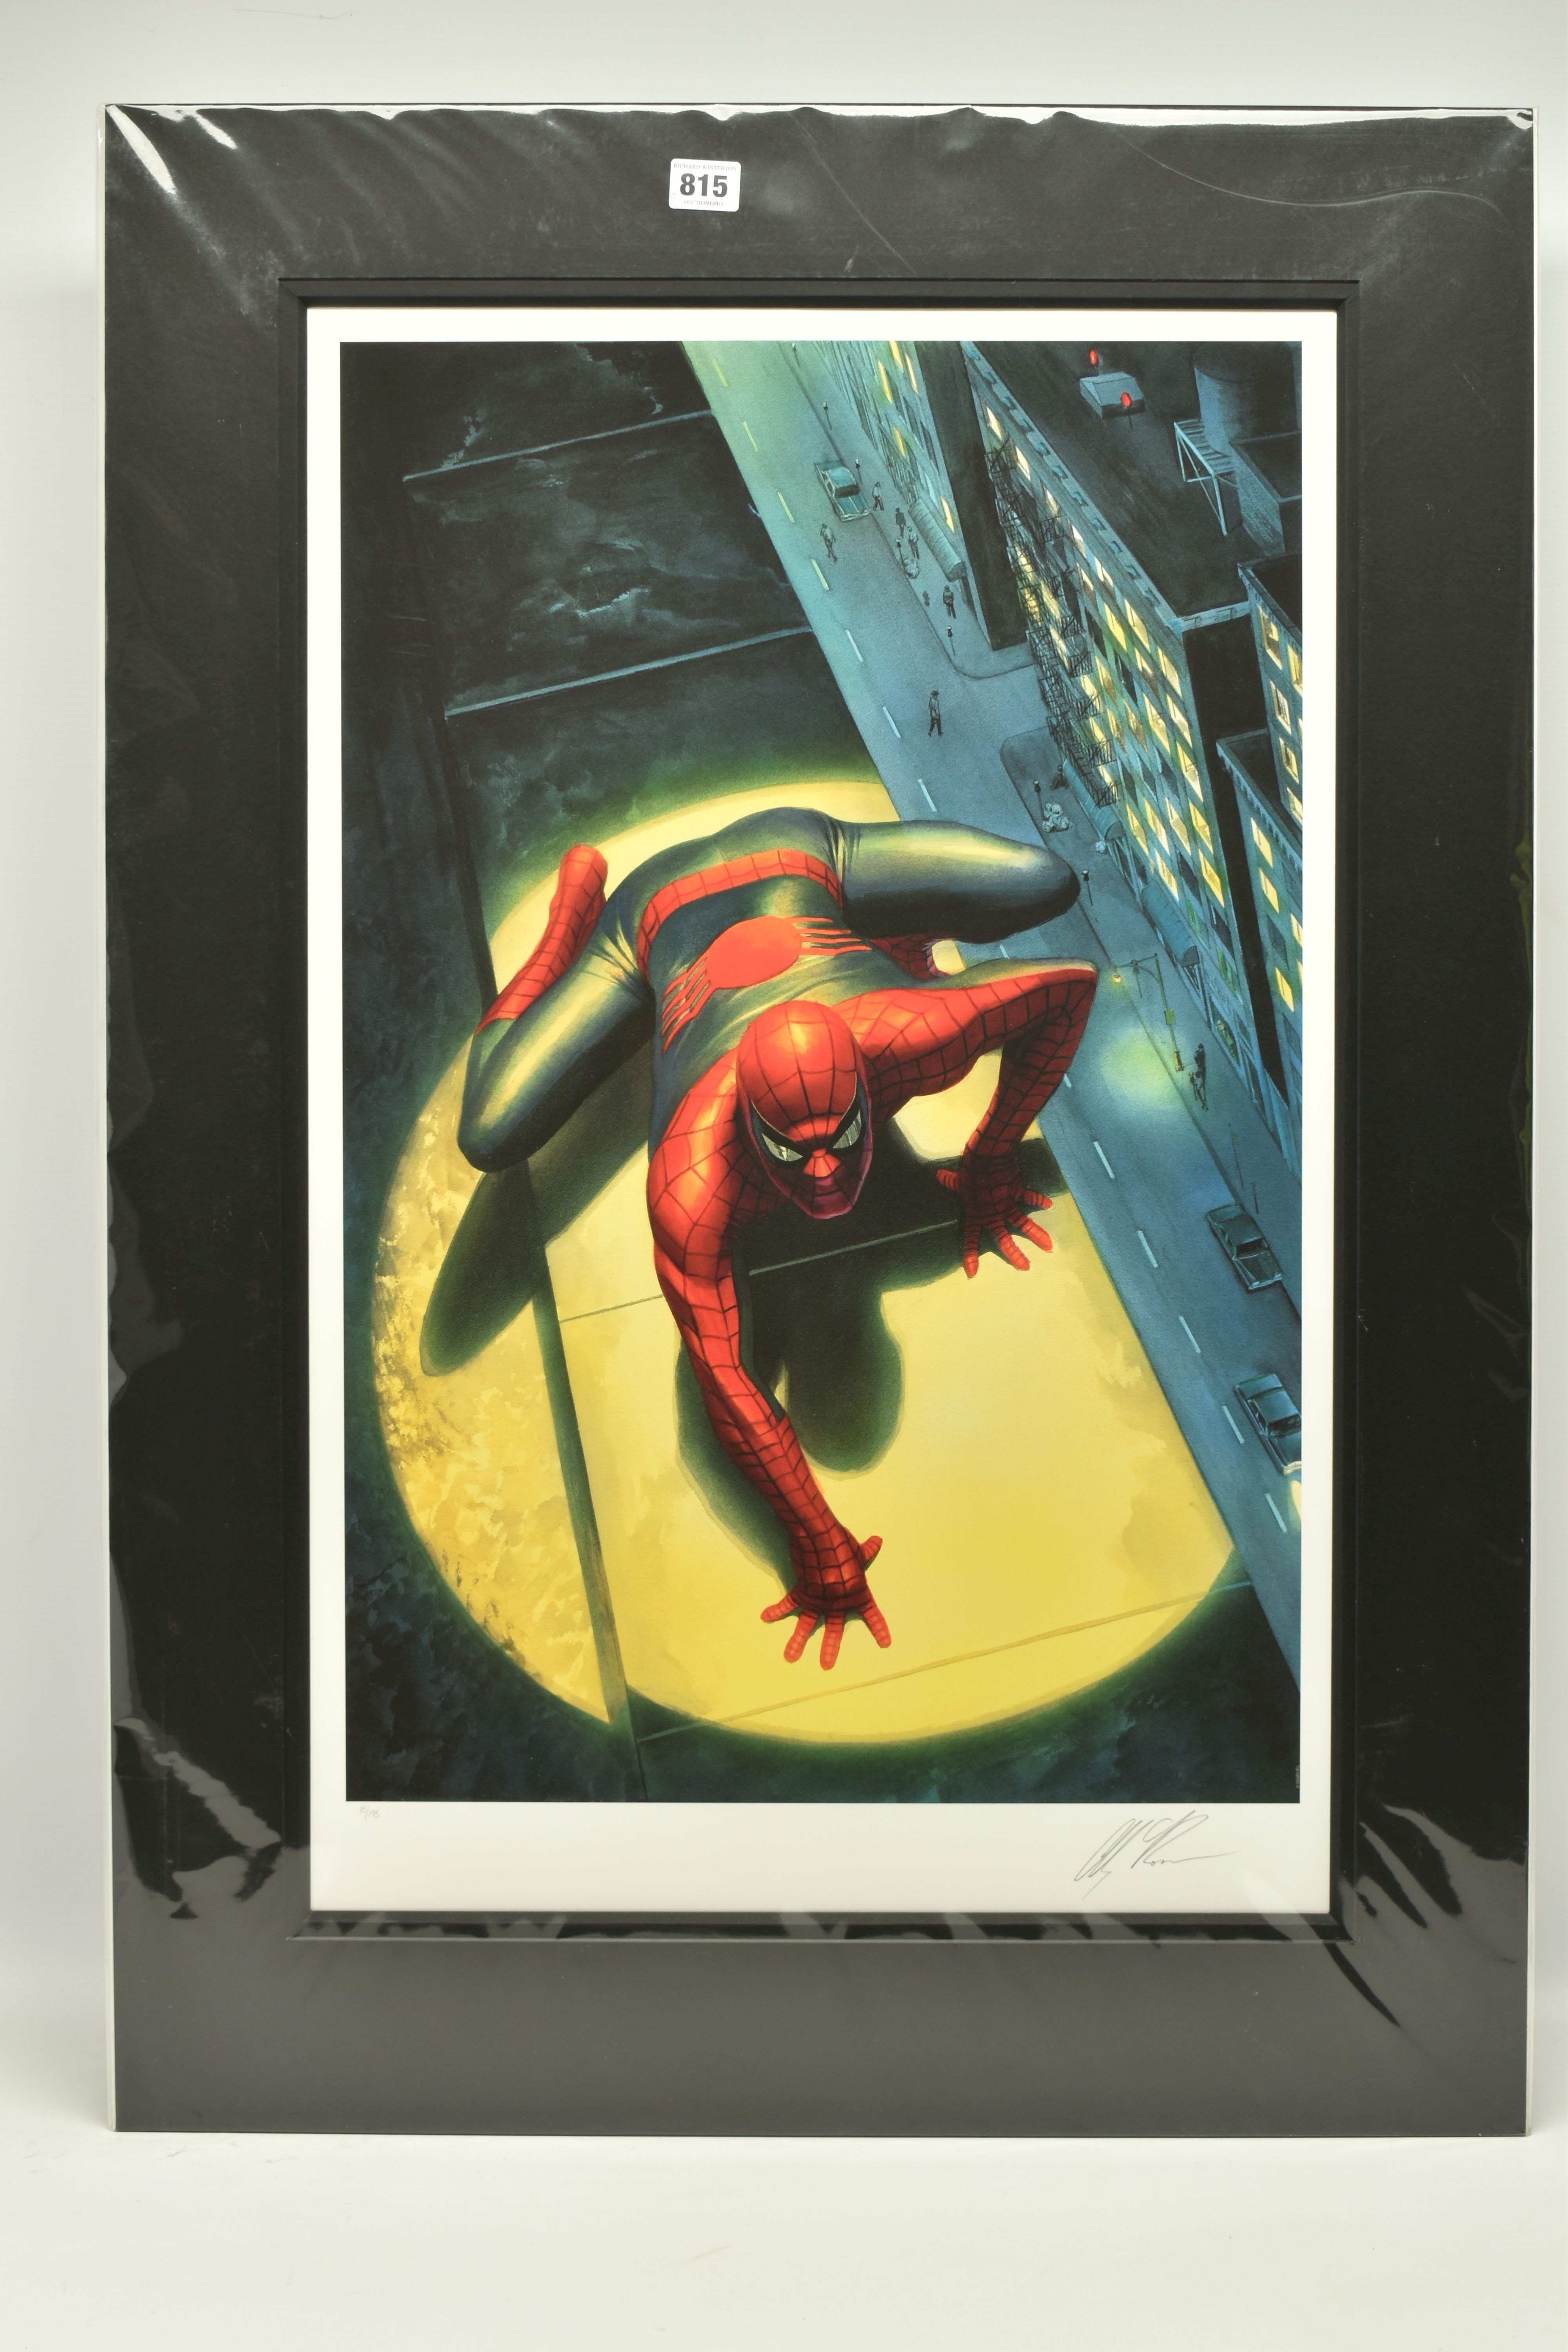 ALEX ROSS FOR MARVEL COMICS (AMERICAN CONTEMPORARY) 'THE SPECTACULAR SPIDERMAN', a signed limited by Alex Ross